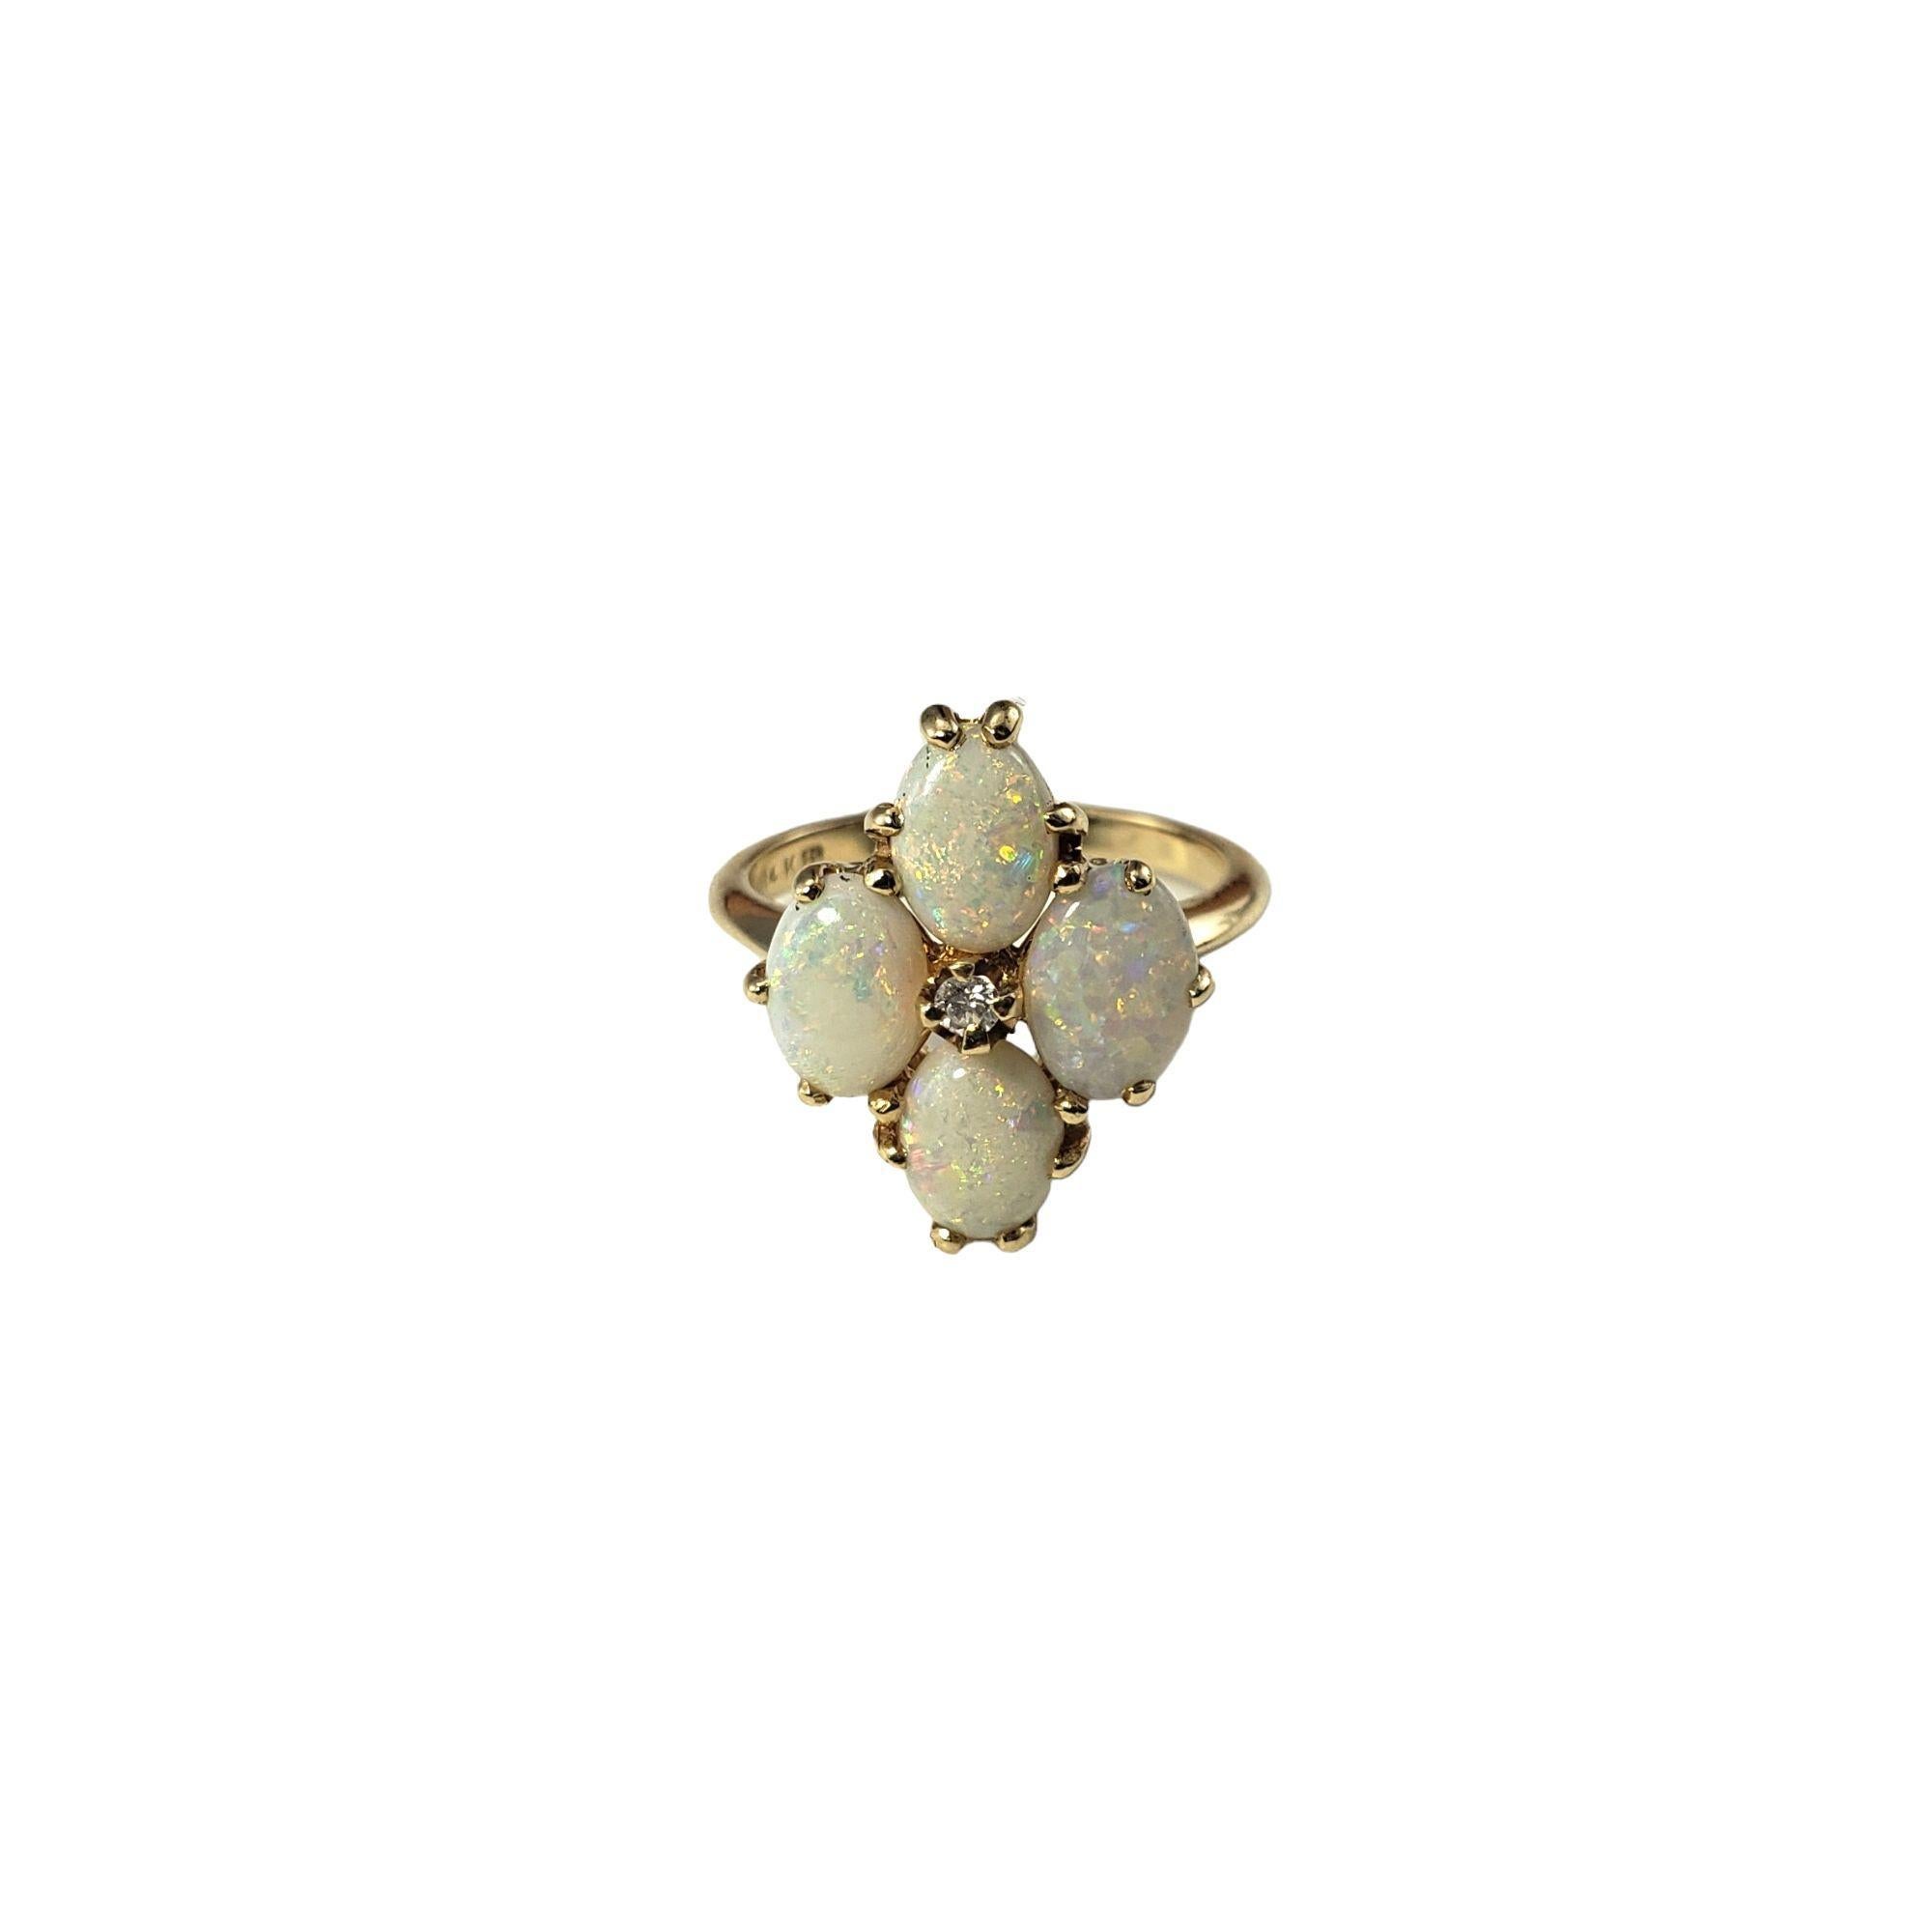 14 Karat Yellow Gold Opal and Diamond Ring Size 5.75-

This stunning ring features four oval opal stones (7 mm x 5 mm each) and one round brilliant cut diamond set in classic 14K yellow gold. Width: 17 mm. Shank: 2 mm.

Approximate diamond